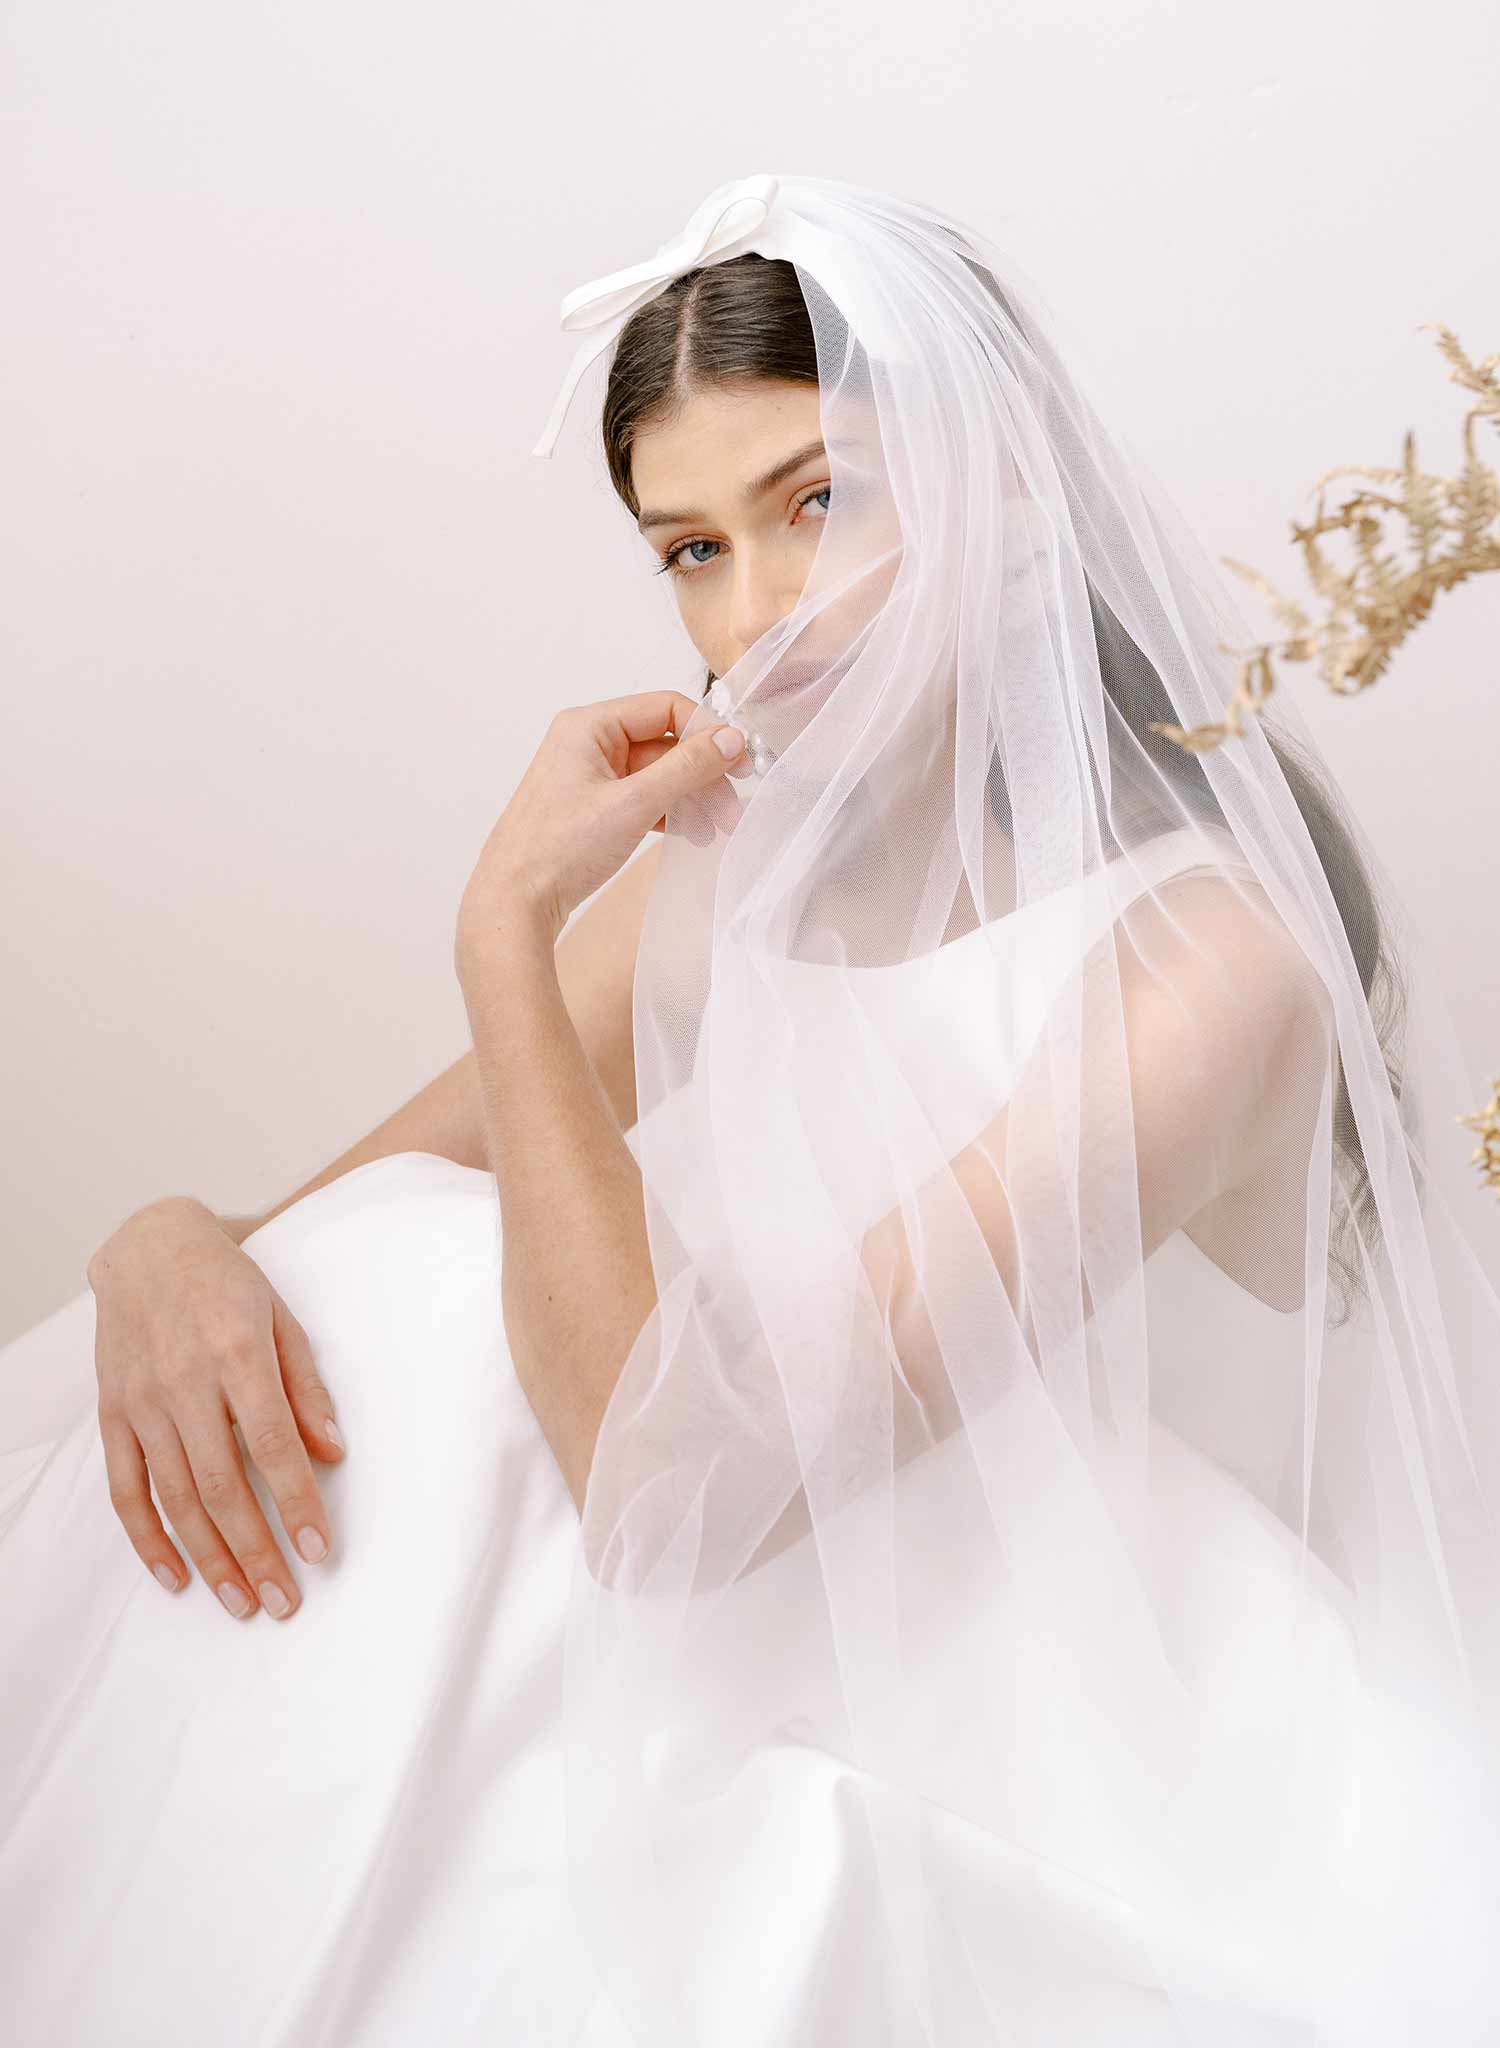 One Blushing Bride Polka Dot Wedding Veil in Ivory Mid Length Point d' Esprit Bridal Veil 32-35 Inches / Without Blusher